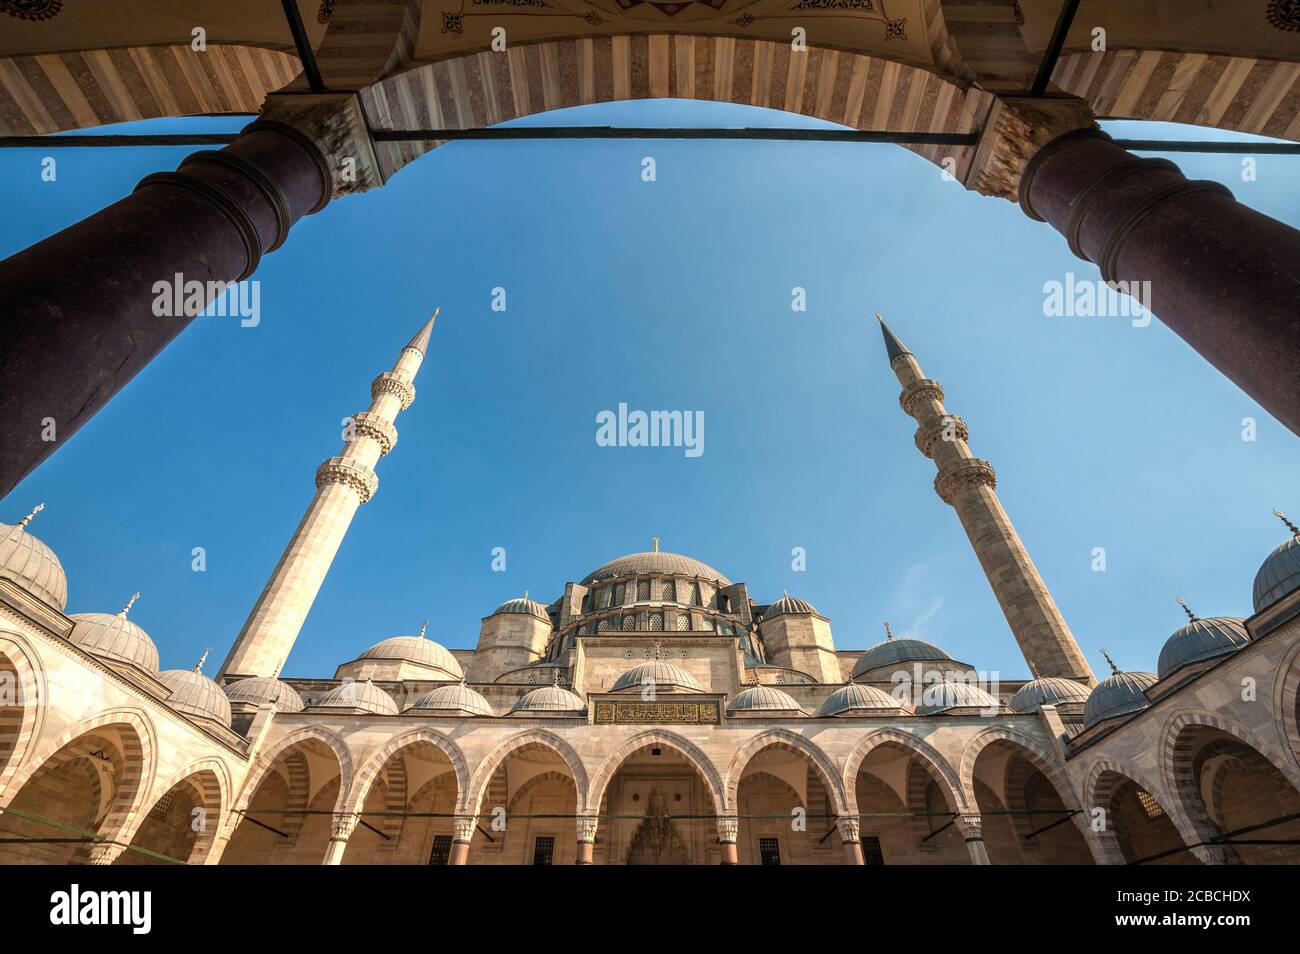 ISTANBUL, TURKEY, The mosque Suleymaniye belongs to the most impressive buildings in Istanbul. It was built by Sinan in the 16th centuary Stock Photo